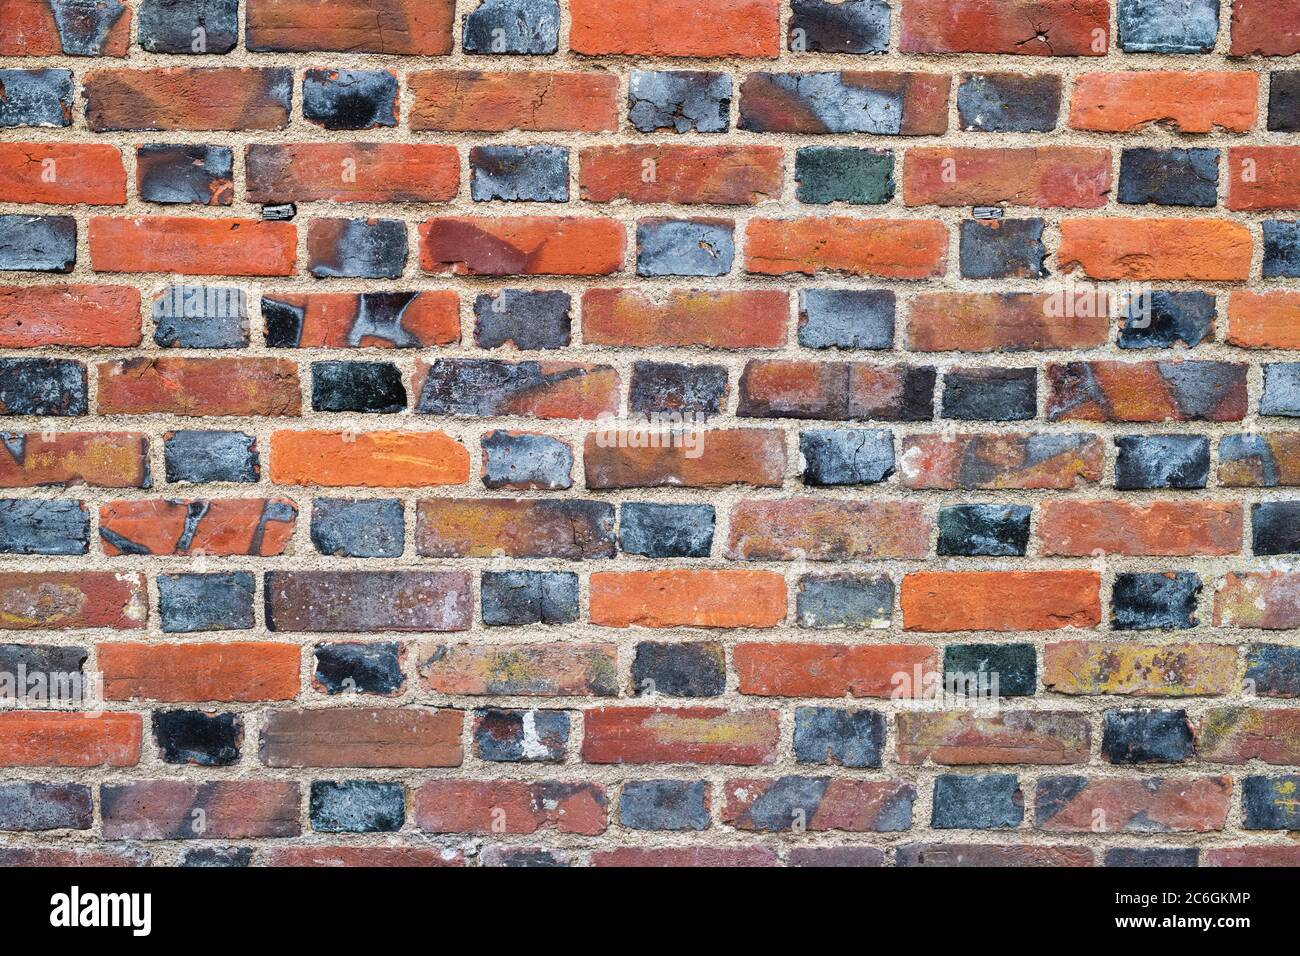 Red and black brick wall pattern. Avebury, Wiltshire, England Stock Photo